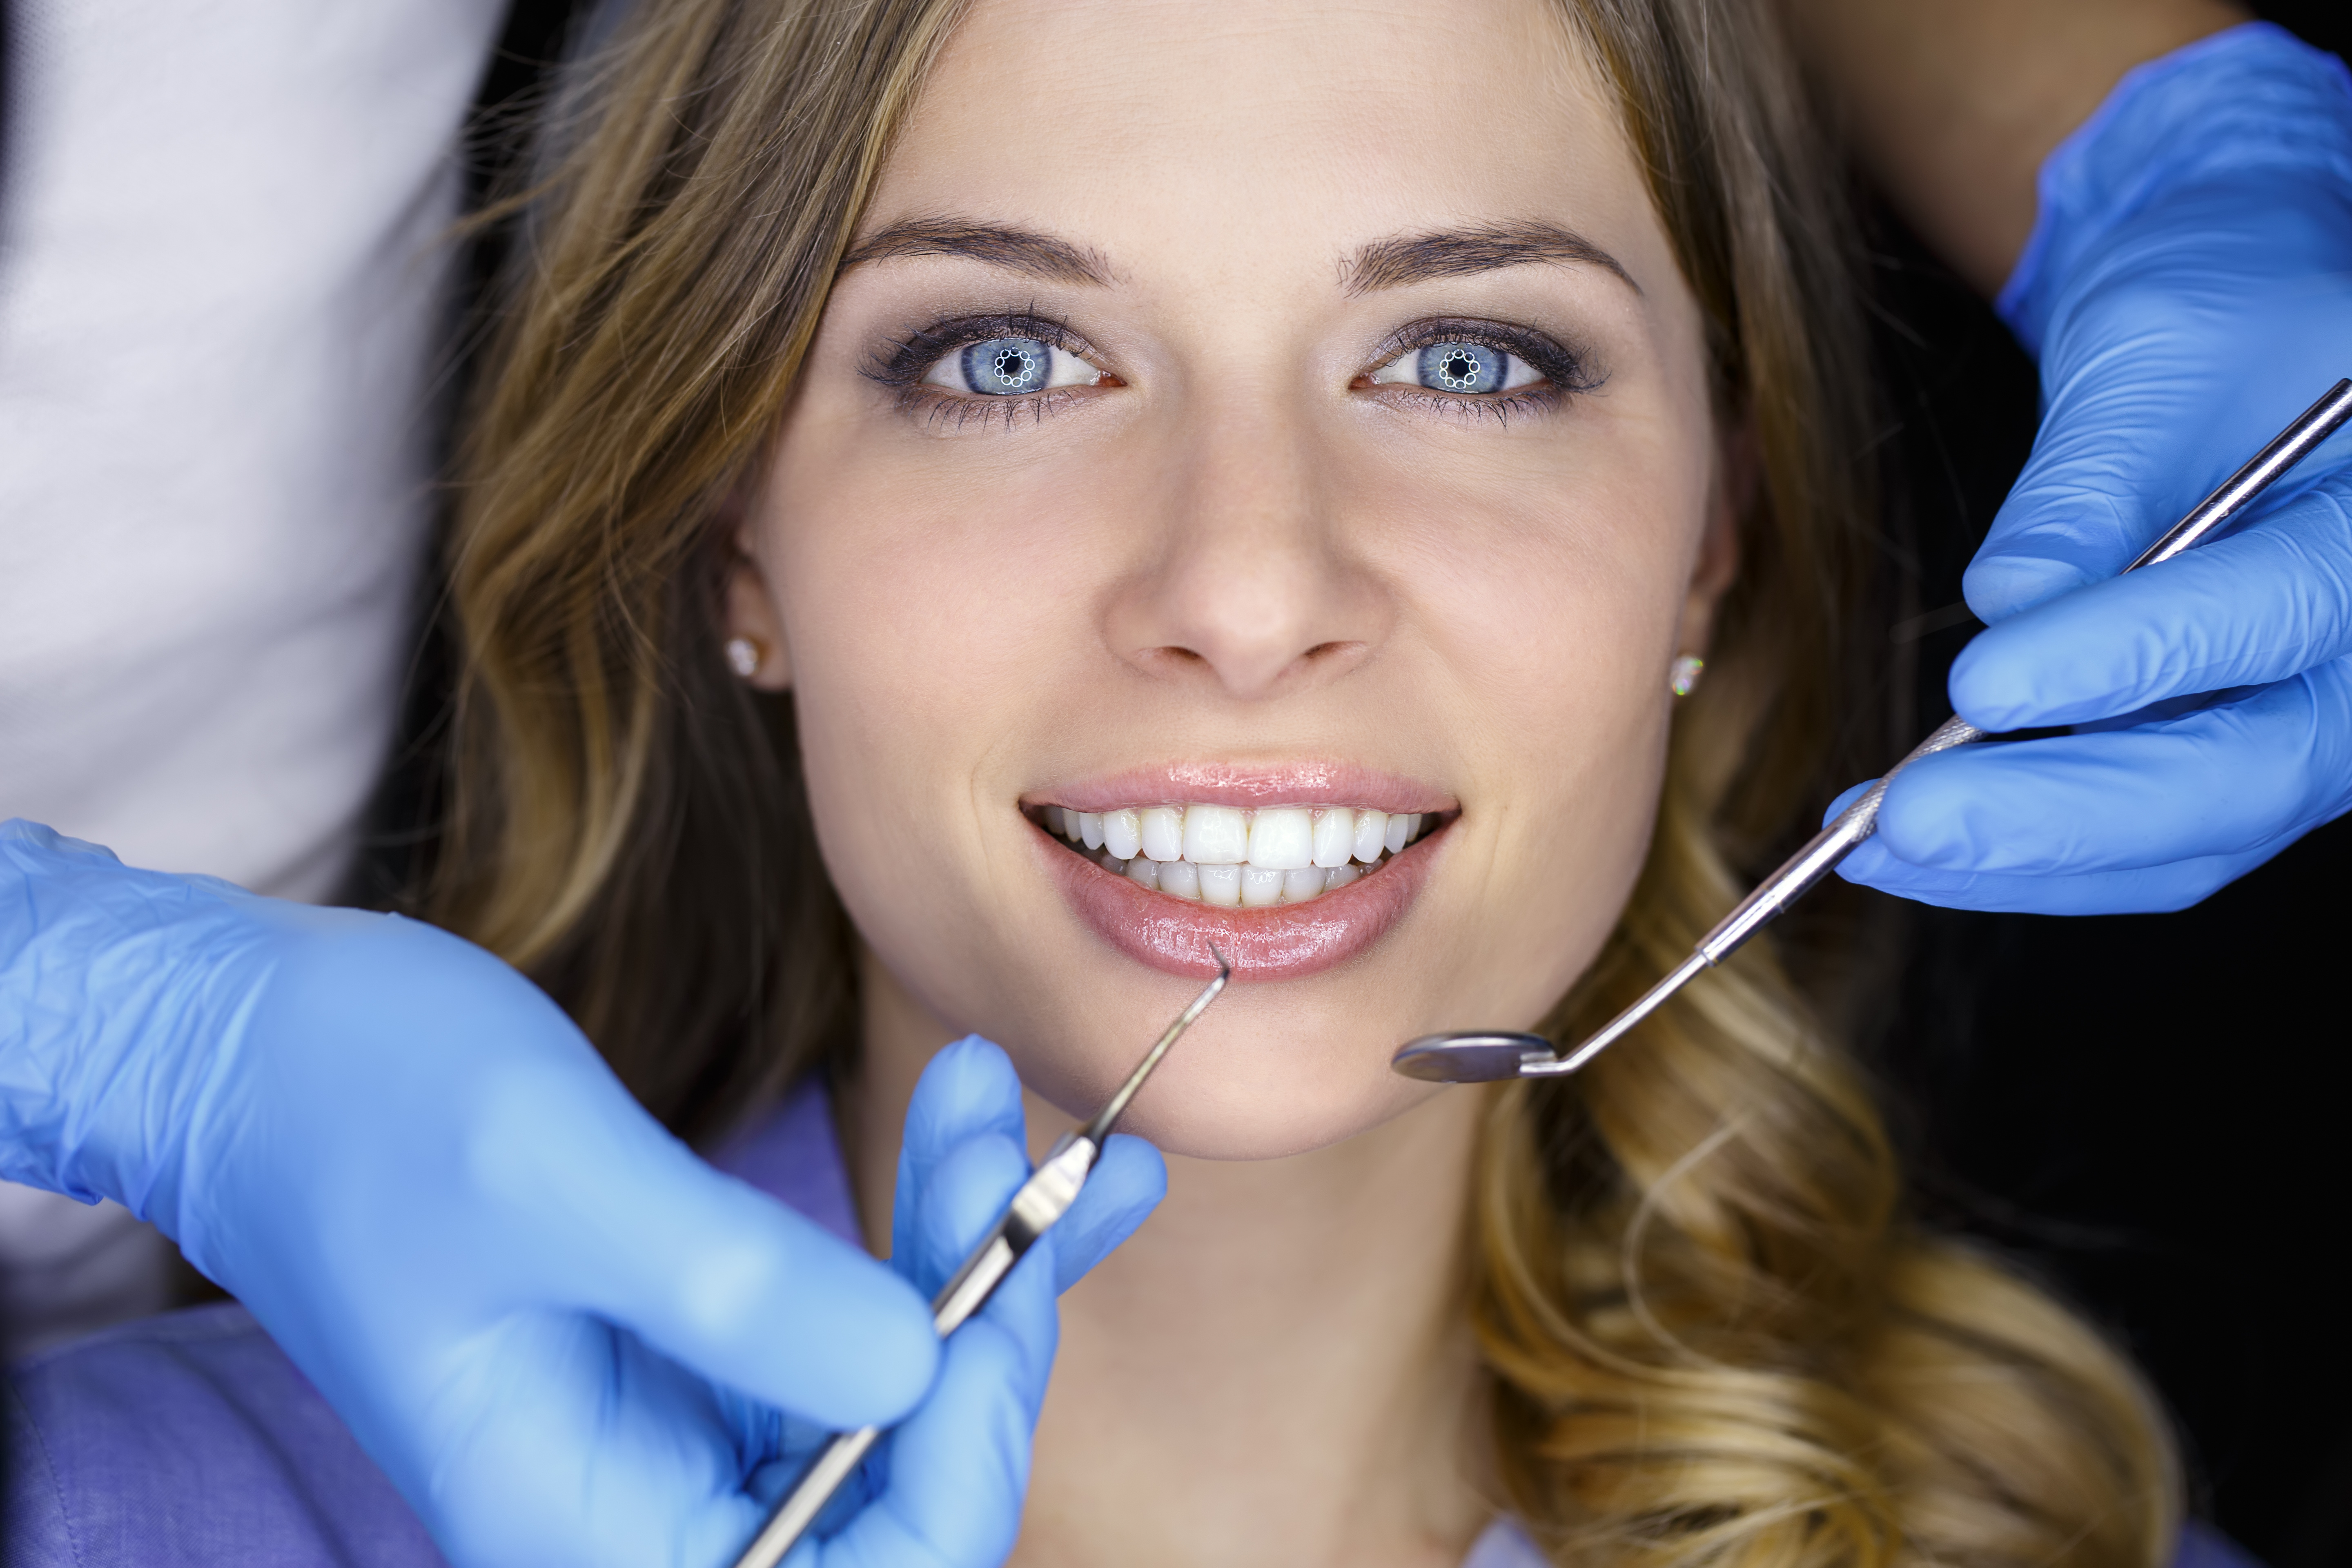 Girl with beautiful white teeth getting patient care at the doctor dentist.